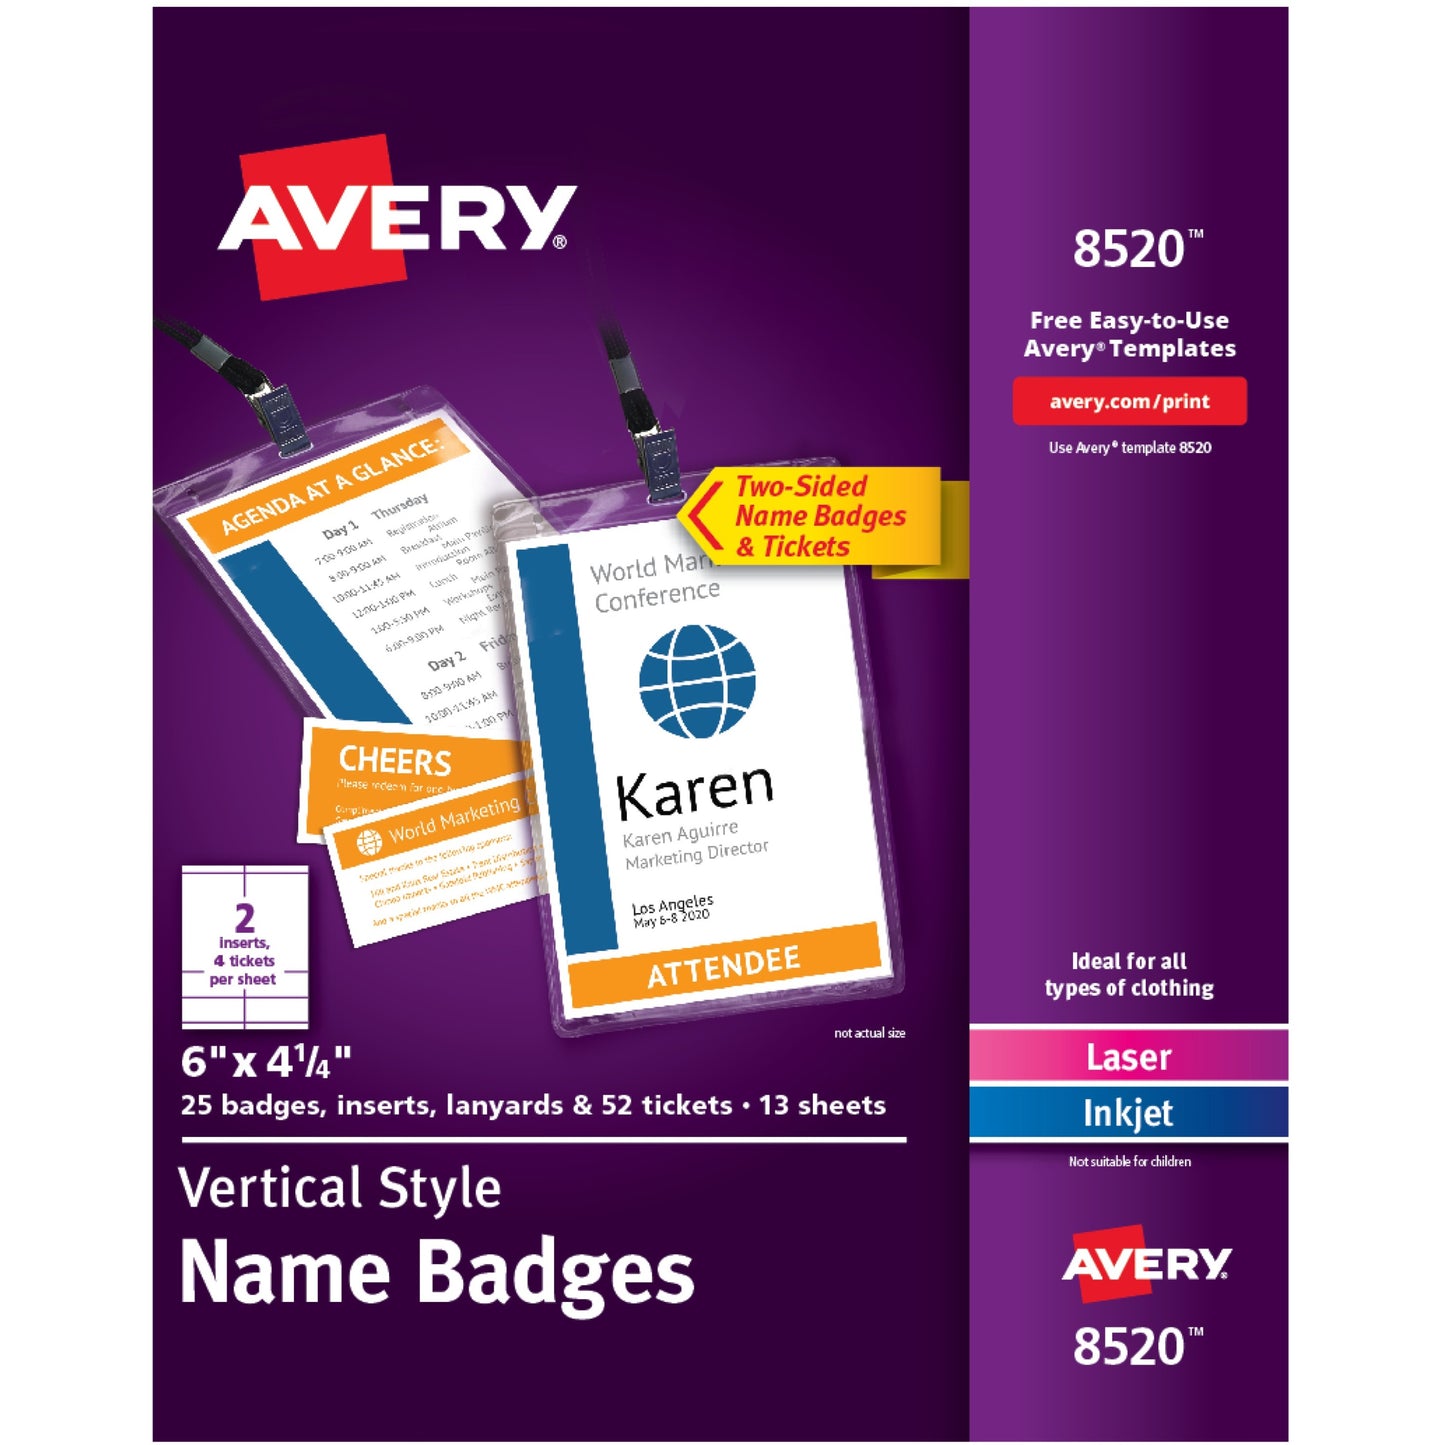 Avery&reg; Vertical Hanging Style Name Badges